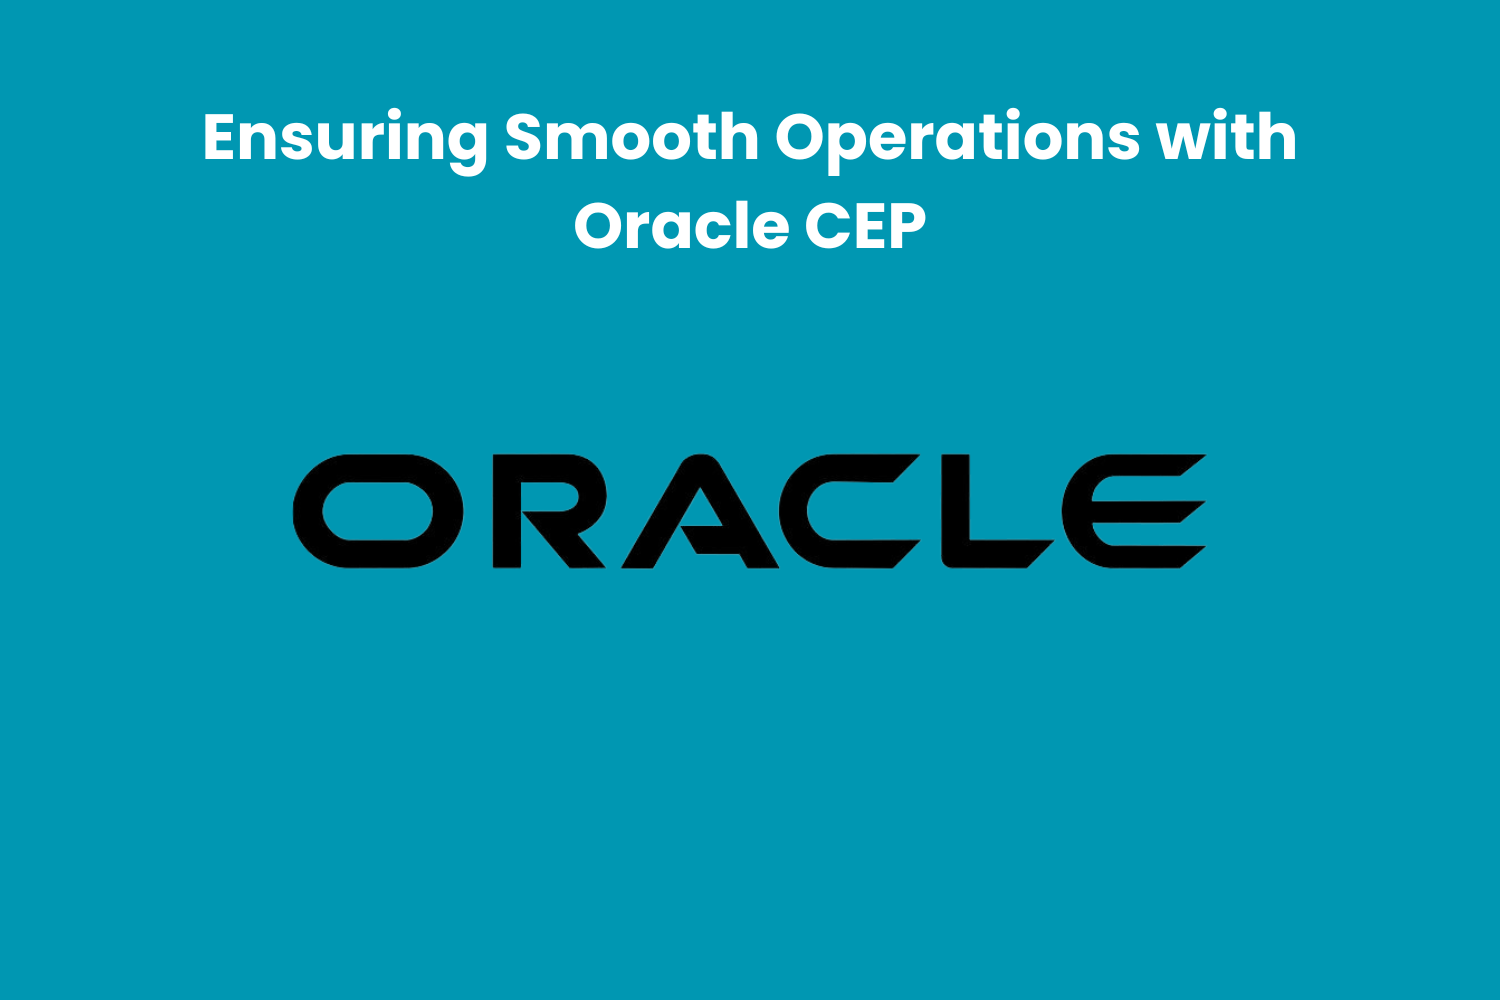 Ensuring Smooth Operations with Oracle CEP